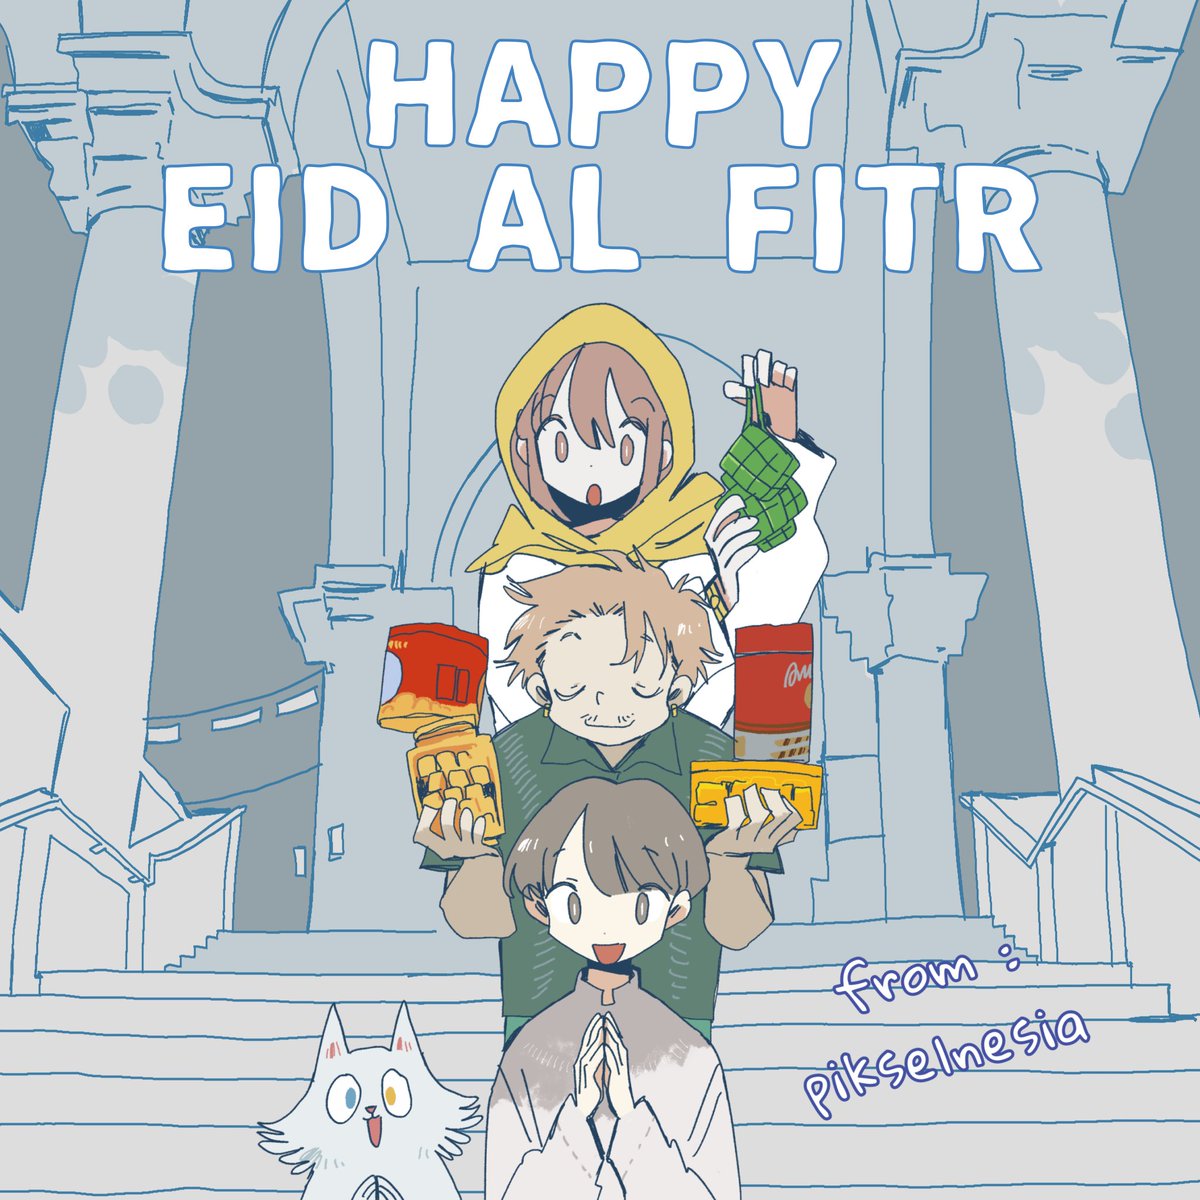 Eid Mubarak, everyone! Let's turn up the love and happiness this holiday season! Check out Sigmund Feud ready to dig into some Opor and Khinggwan cookies!  #EidMubarak #FestiveFeels #SigmundFeudRocks